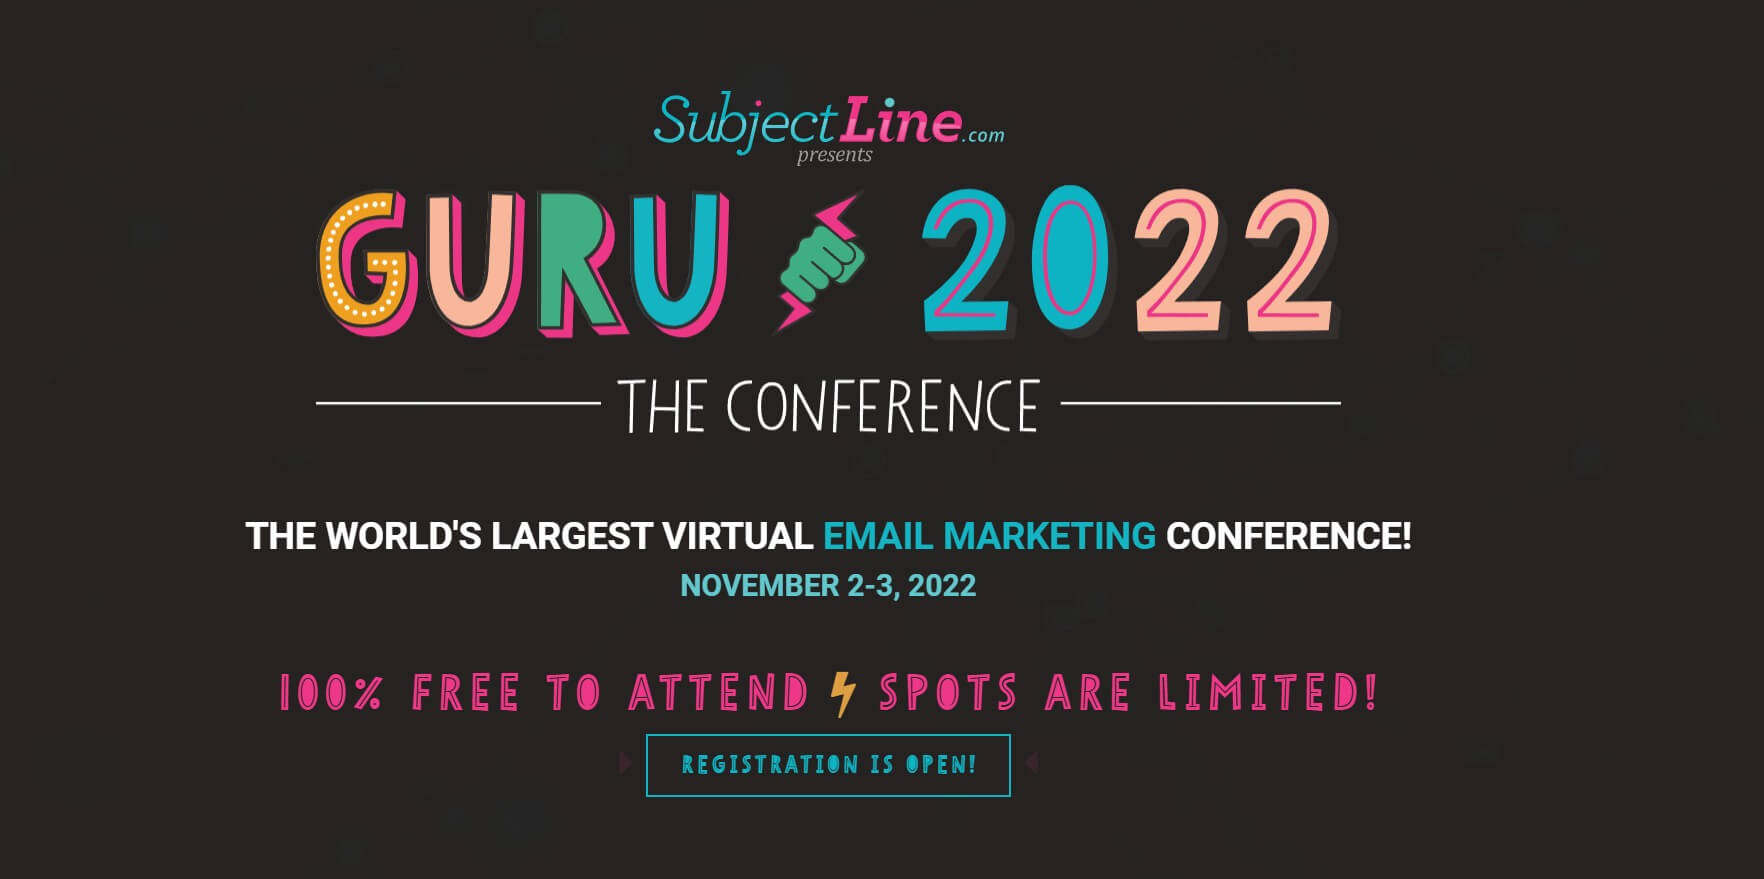 The world's largest virtual email marketing conference